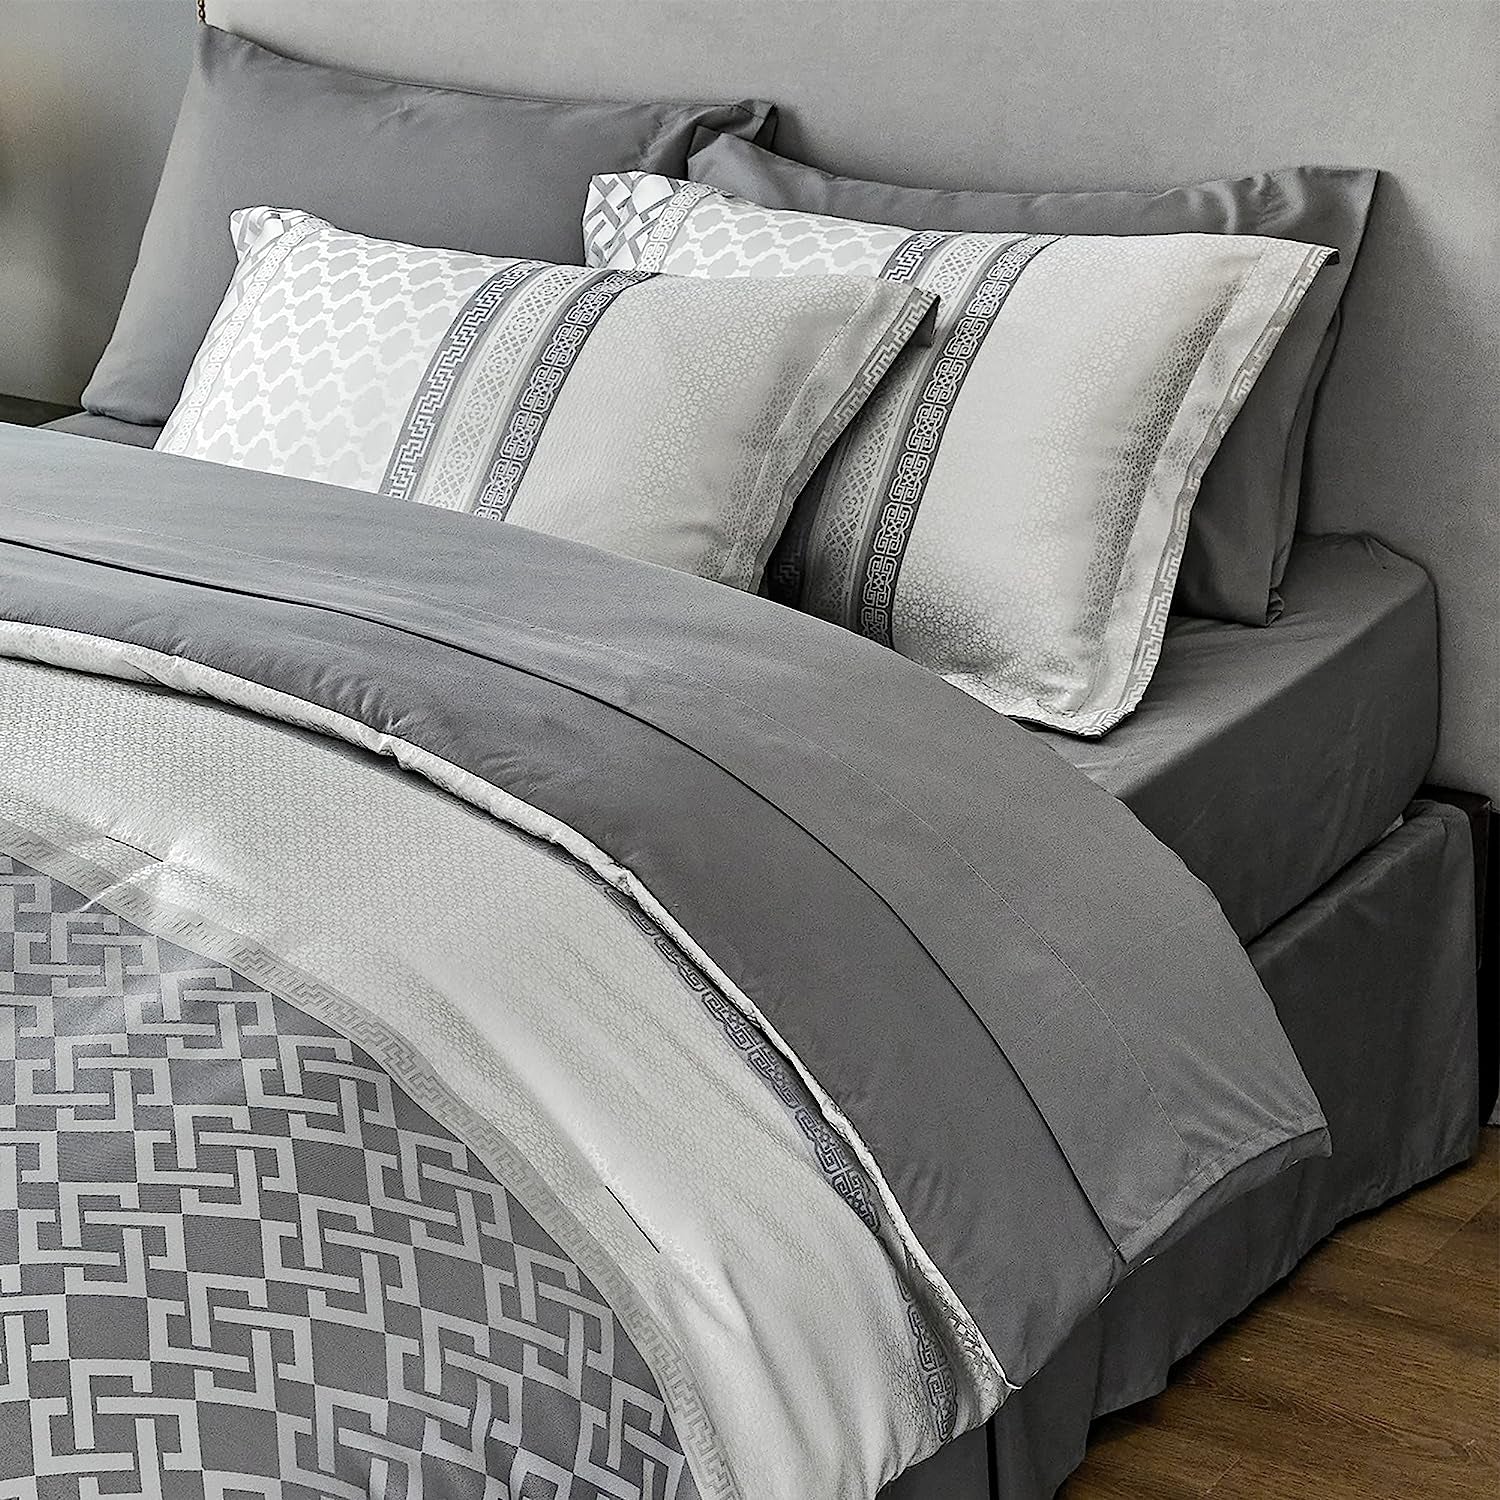 Queen Size Bedding Set - 7 Pieces Hotel Style Queen Bed in a Bag，Grey Comforter Set with Comforter, Sheets, Pillowcases & Shams